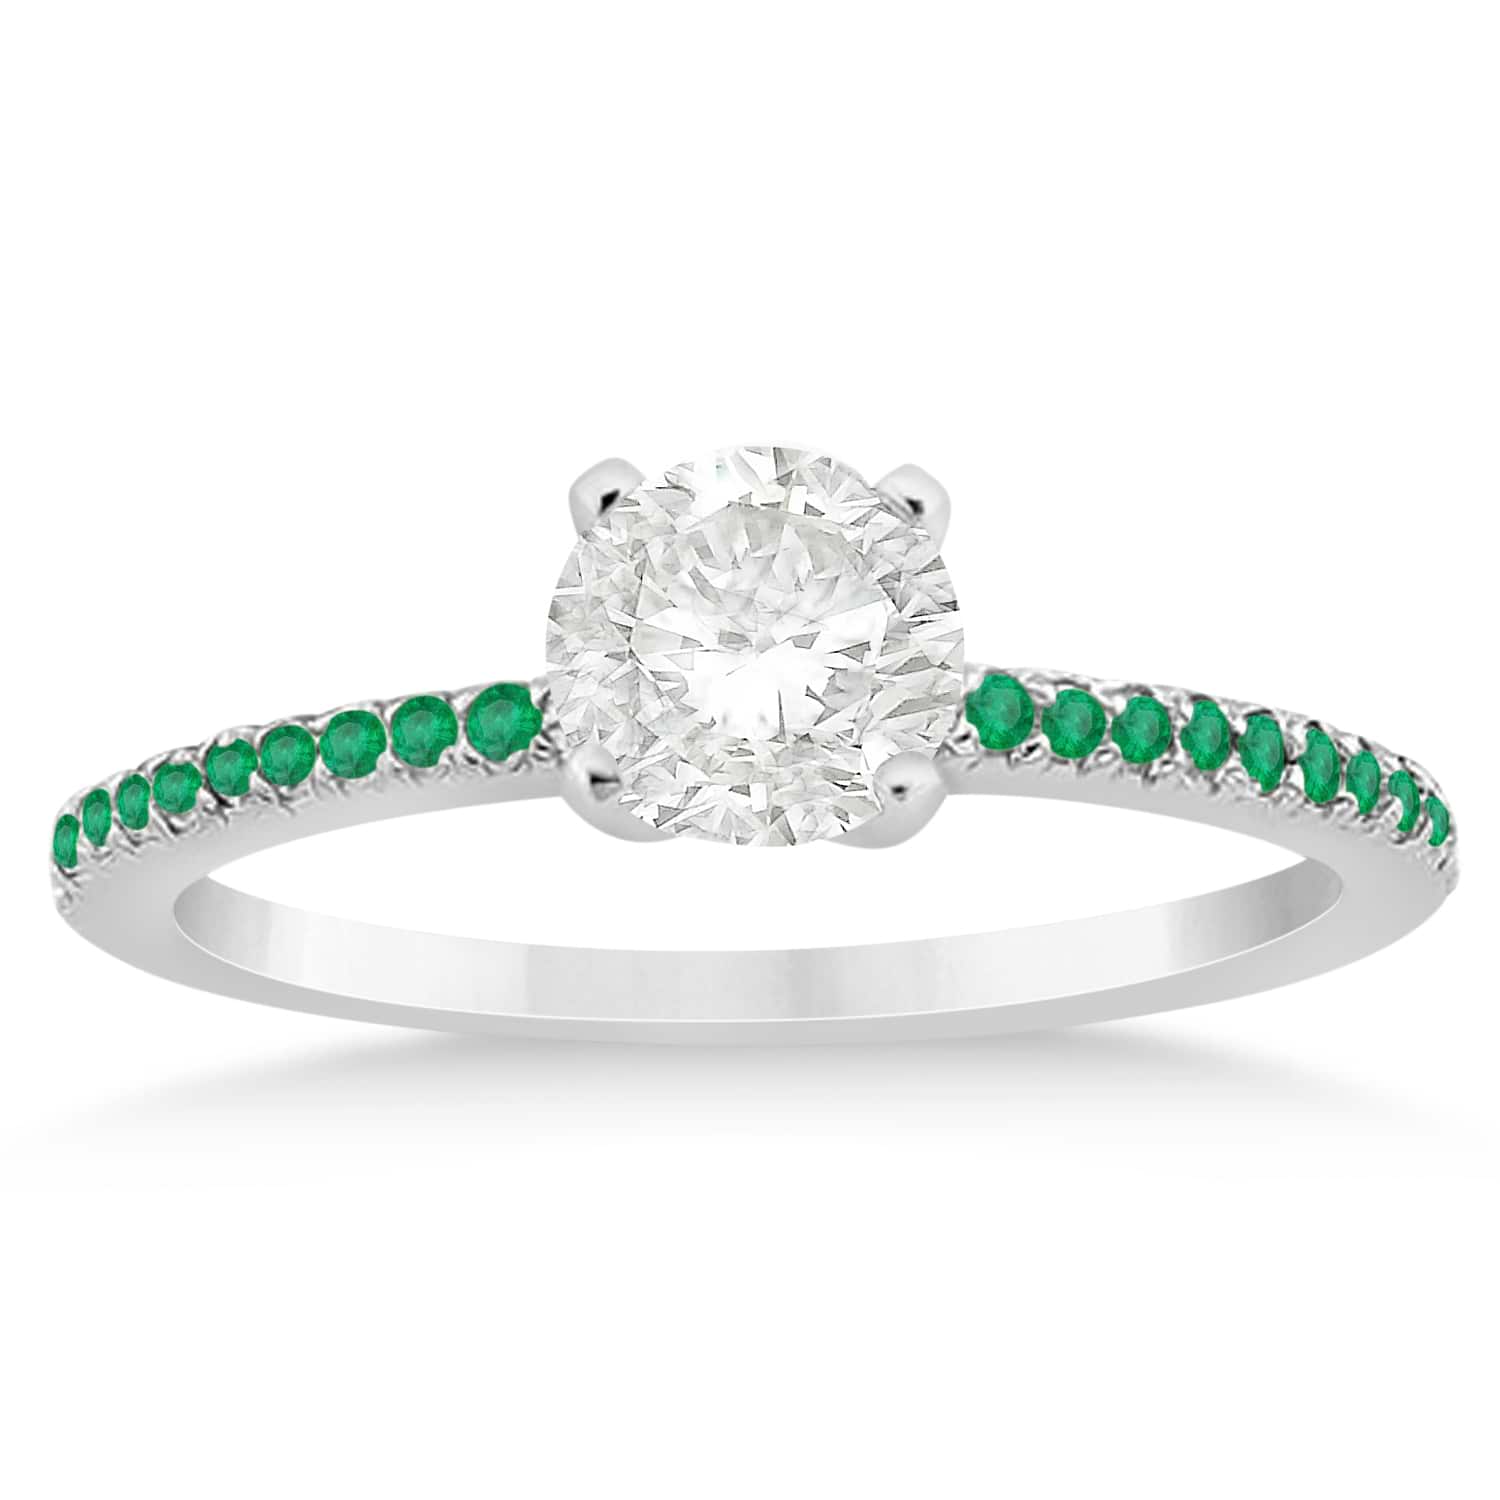 Emerald Accented Engagement Ring Setting 18k White Gold 0.18ct